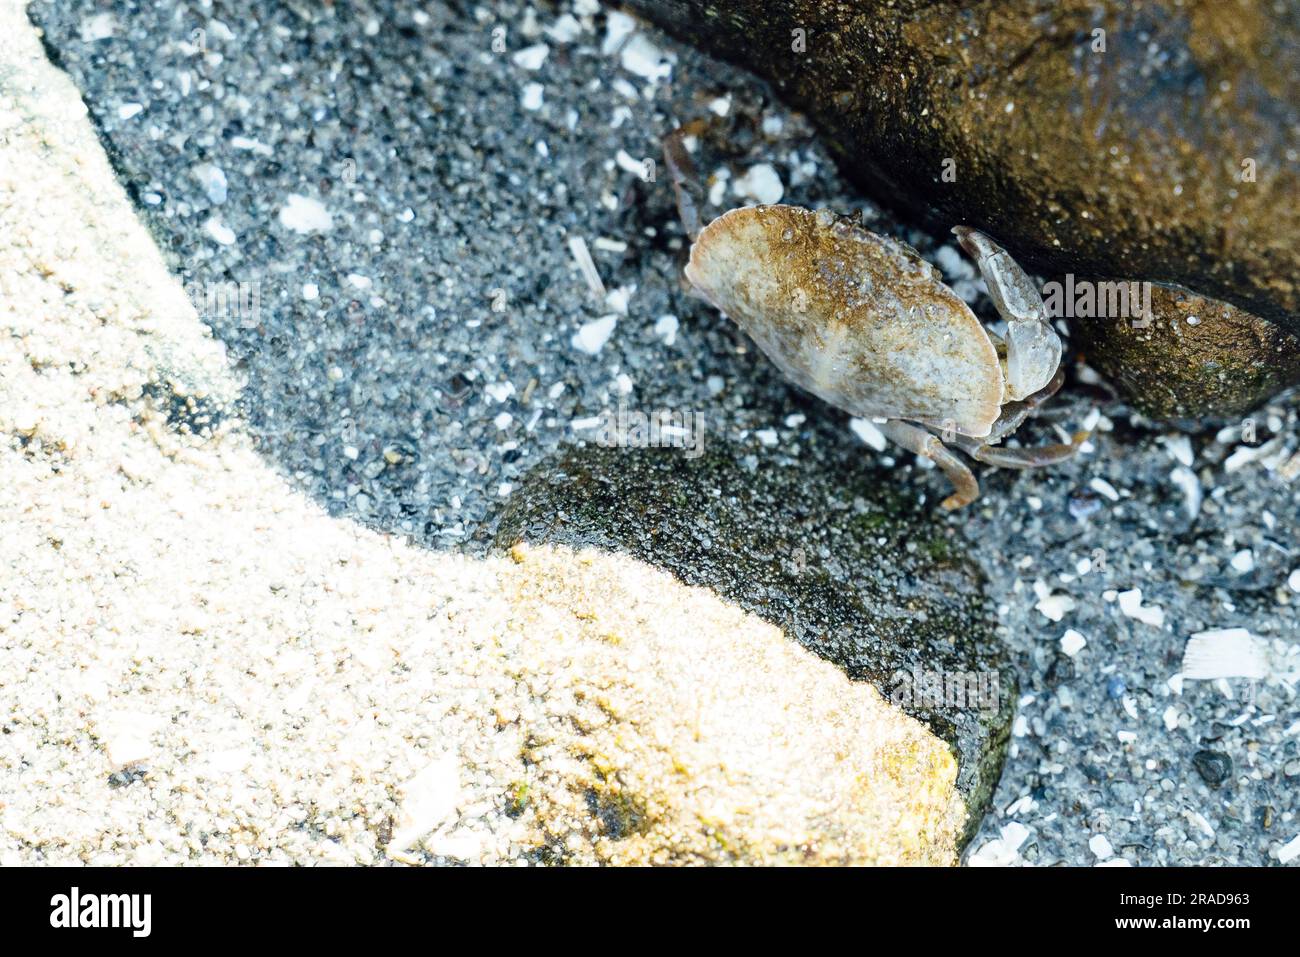 View from above of a small Red Rock Crab in a tide pool on the beach Stock Photo